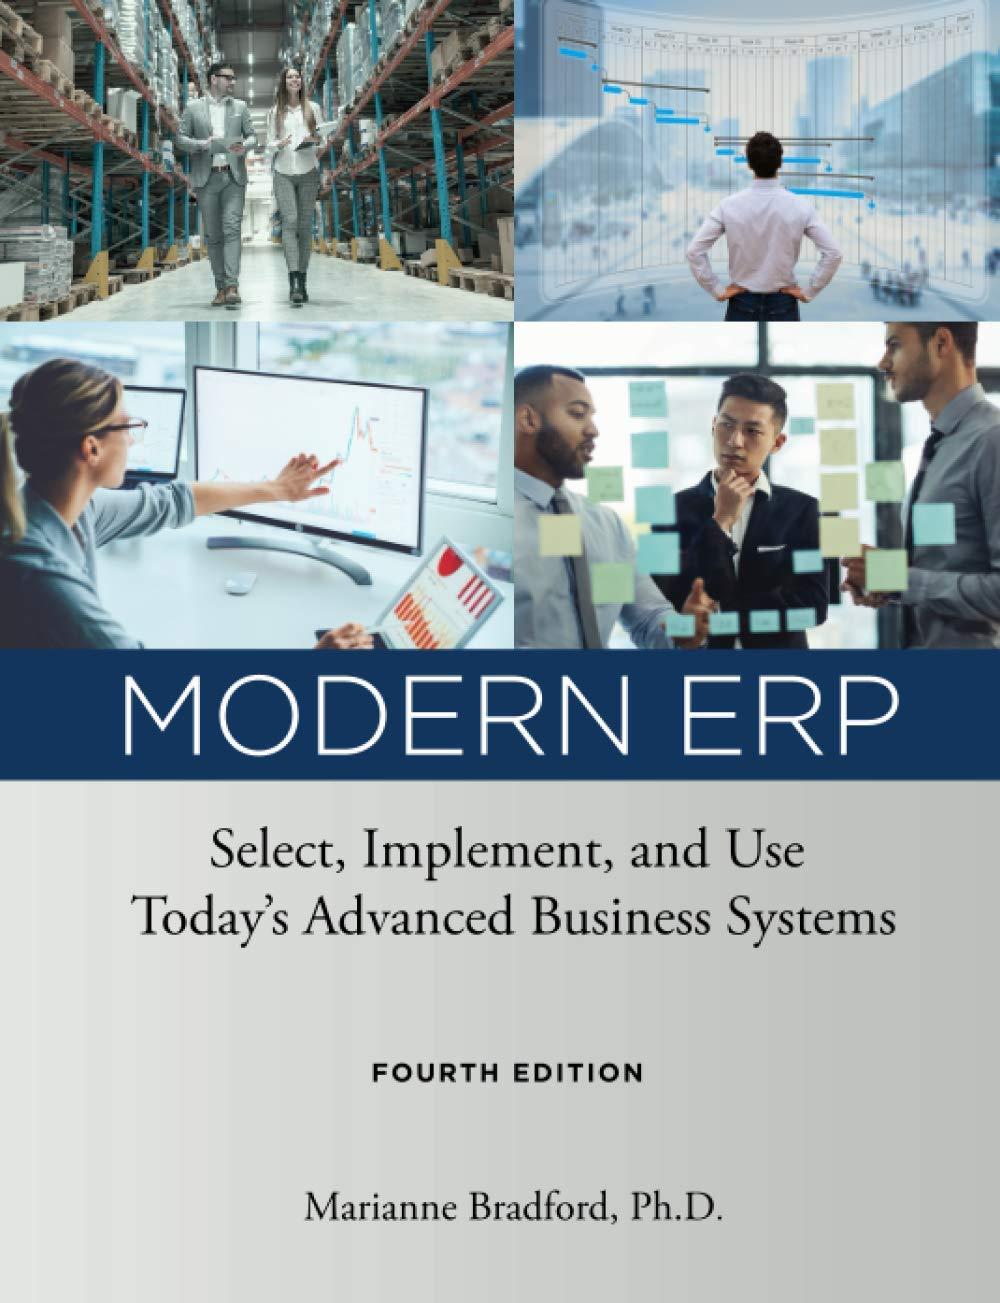 modern erp select implement and use today's advanced business systems 4th edition dr. marianne bradford